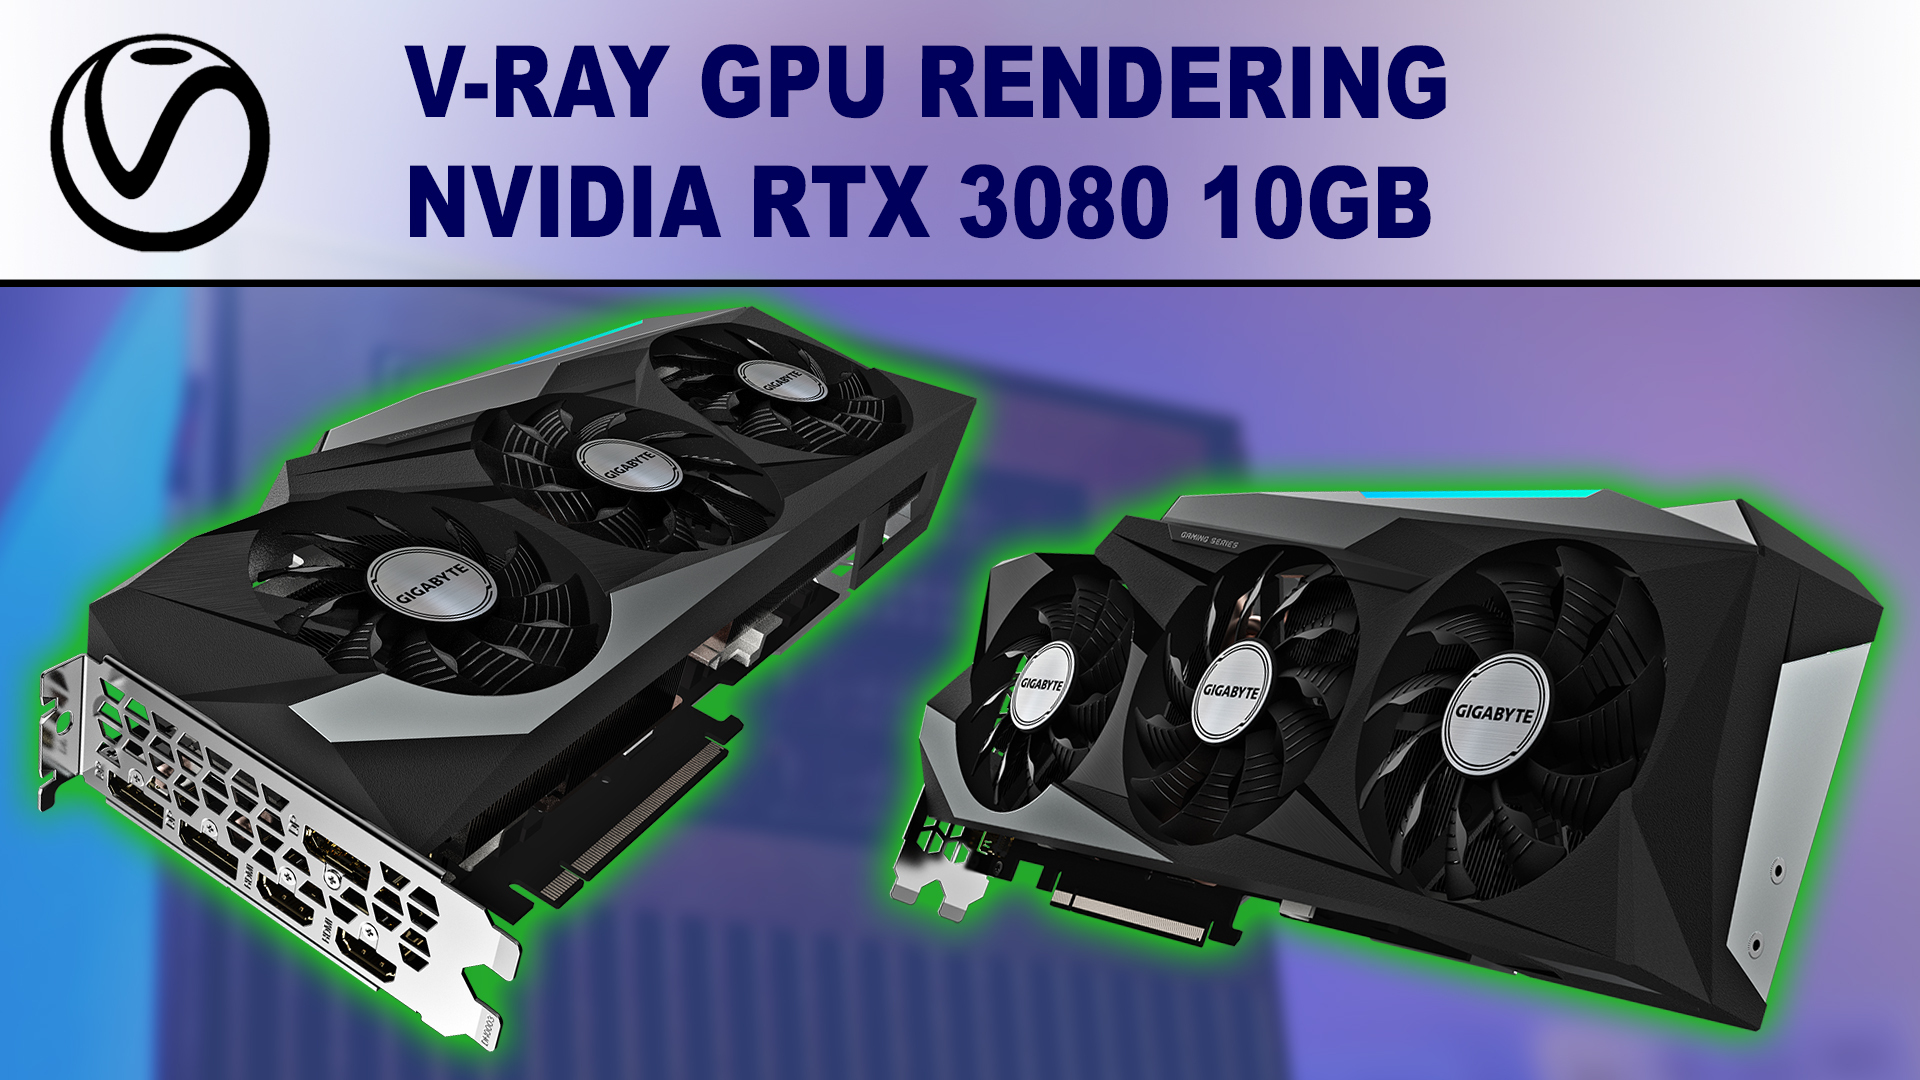 V-Ray GPU Rendering Performance Review for NVIDIA GeForce RTX 3080 10GB